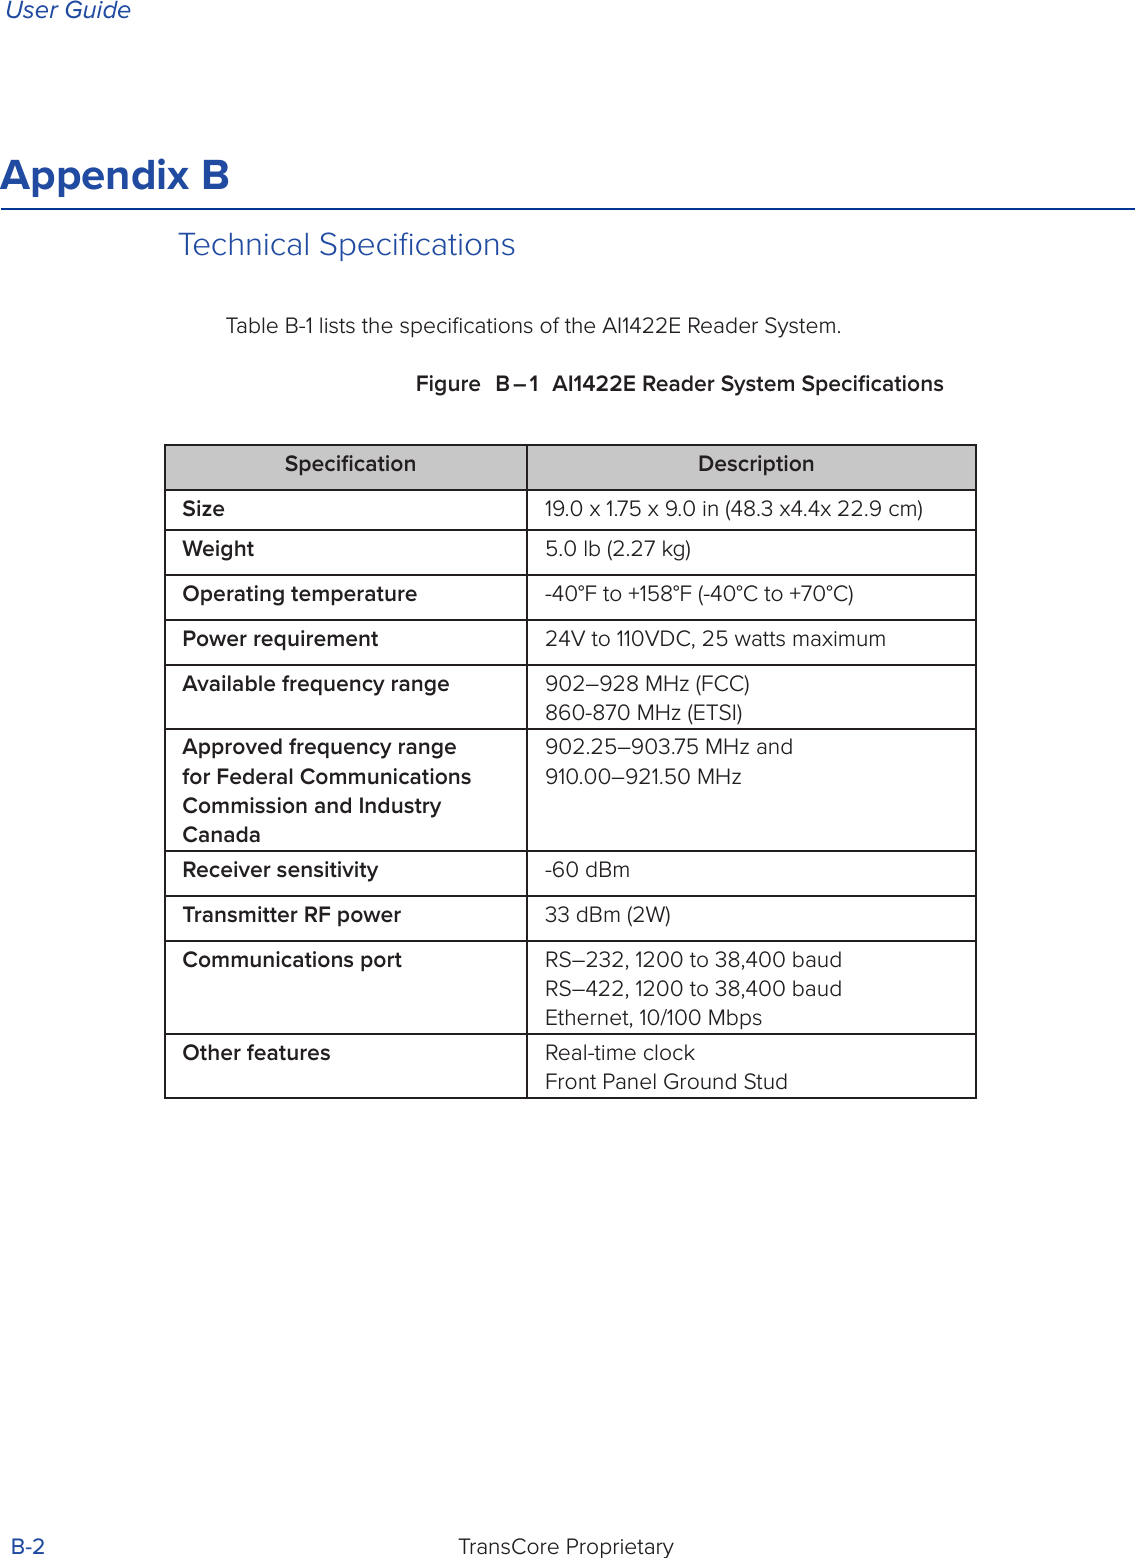 User GuideTransCore Proprietary B-2Appendix B Technical SpeciﬁcationsTable B-1 lists the speciﬁcations of the AI1422E Reader System.Figure B – 1 AI1422E Reader System SpeciﬁcationsSpeciﬁcation DescriptionSize 19.0 x 1.75 x 9.0 in (48.3 x4.4x 22.9 cm)Weight 5.0 lb (2.27 kg)Operating temperature -40°F to +158°F (-40°C to +70°C)Power requirement 24V to 110VDC, 25 watts maximum Available frequency range 902–928 MHz (FCC) 860-870 MHz (ETSI)Approved frequency range for Federal Communications Commission and Industry Canada902.25–903.75 MHz and  910.00–921.50 MHzReceiver sensitivity -60 dBmTransmitter RF power 33 dBm (2W)Communications port RS–232, 1200 to 38,400 baud RS–422, 1200 to 38,400 baud Ethernet, 10/100 MbpsOther features Real-time clock Front Panel Ground Stud